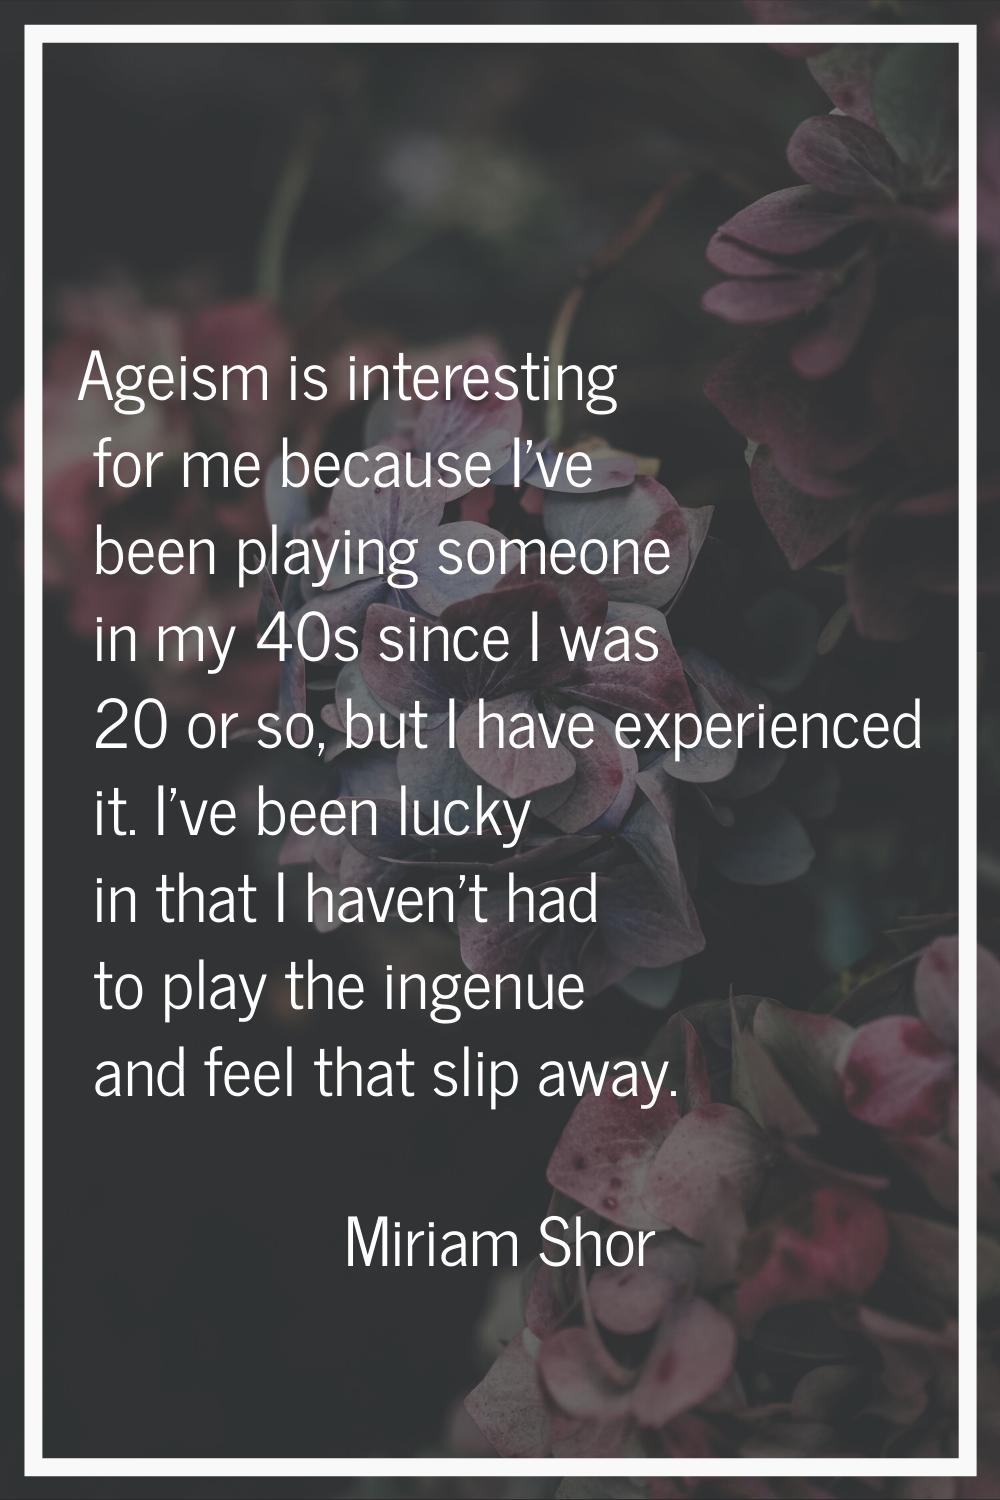 Ageism is interesting for me because I've been playing someone in my 40s since I was 20 or so, but 